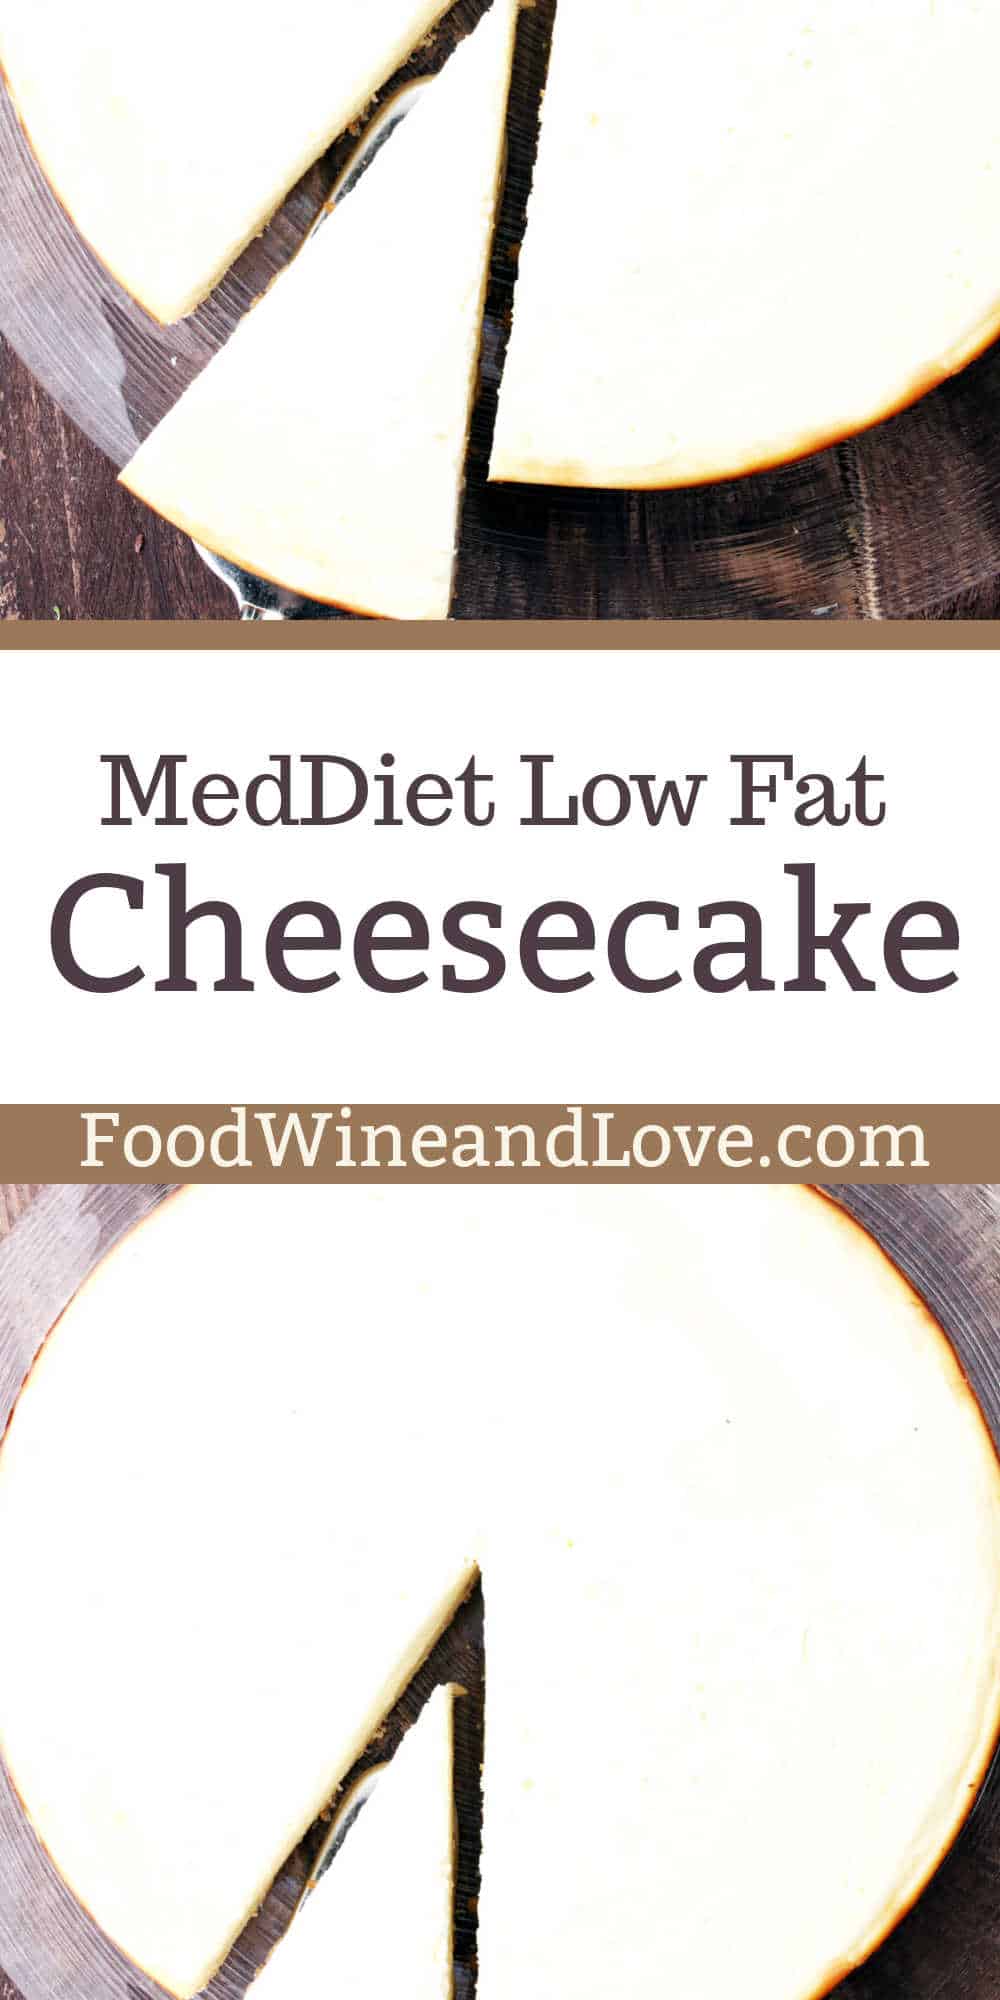 Delicious Low Fat Cheesecake